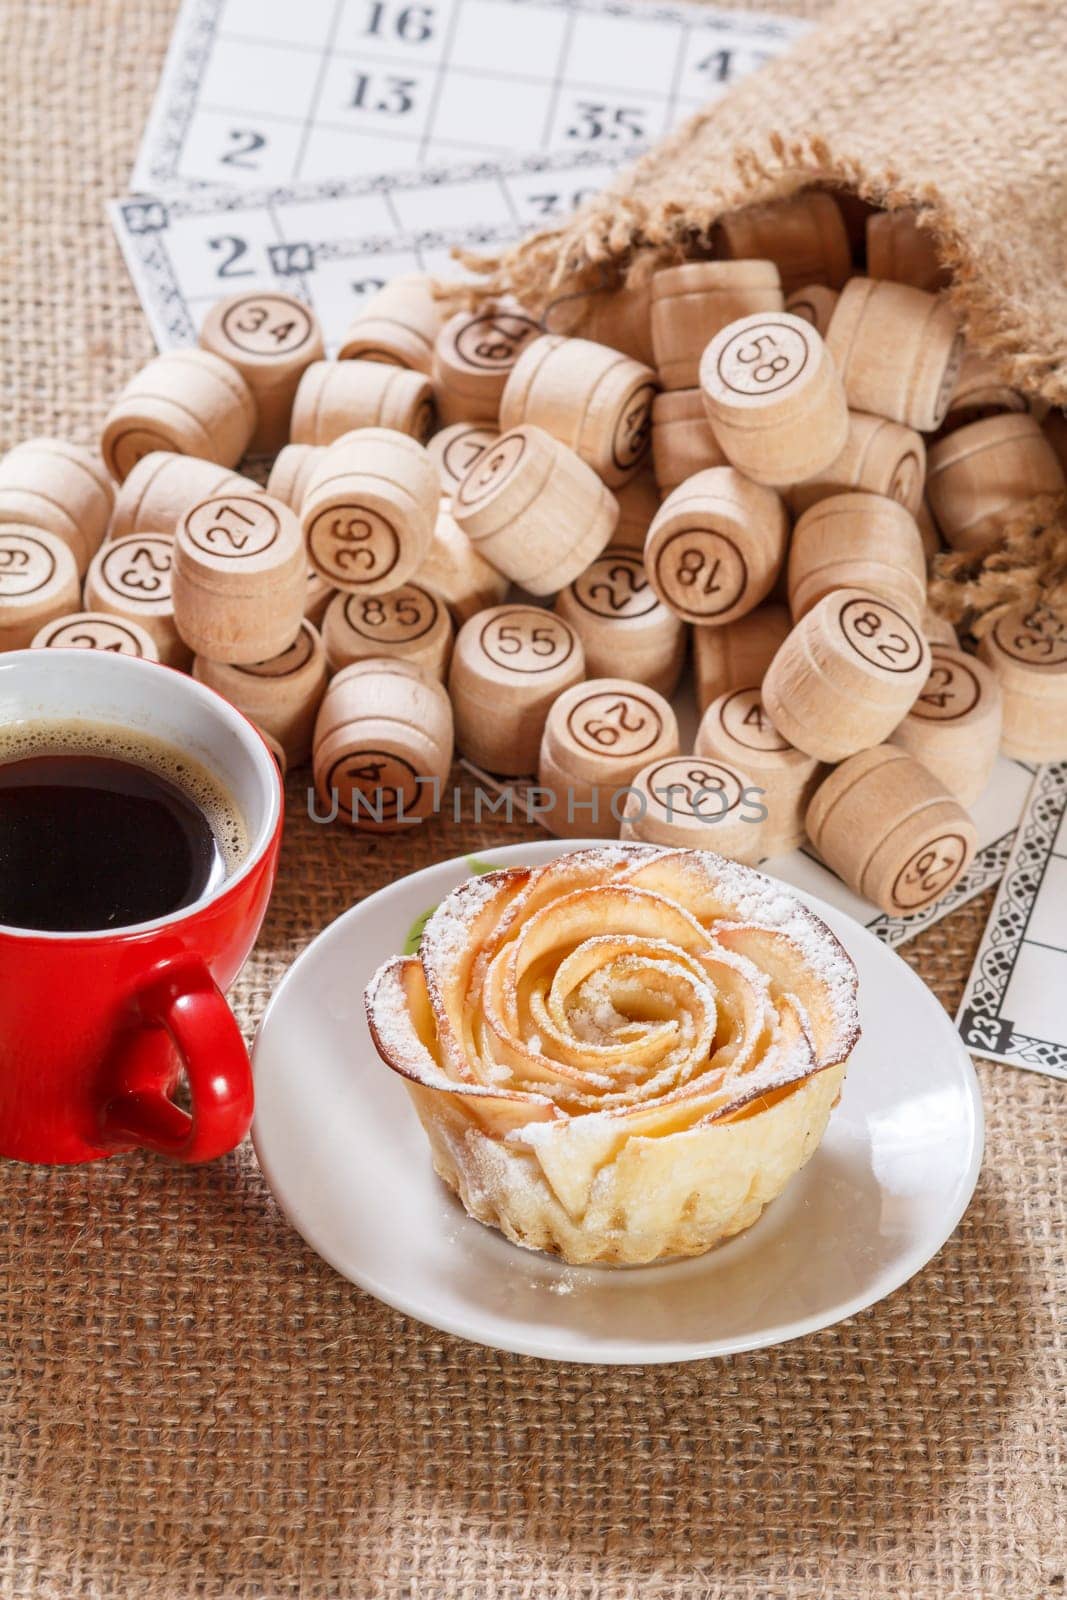 Board game lotto on sackcloth. Wooden lotto barrels in bag and game cards with cup of coffee and homemade cookie on plate. by mvg6894